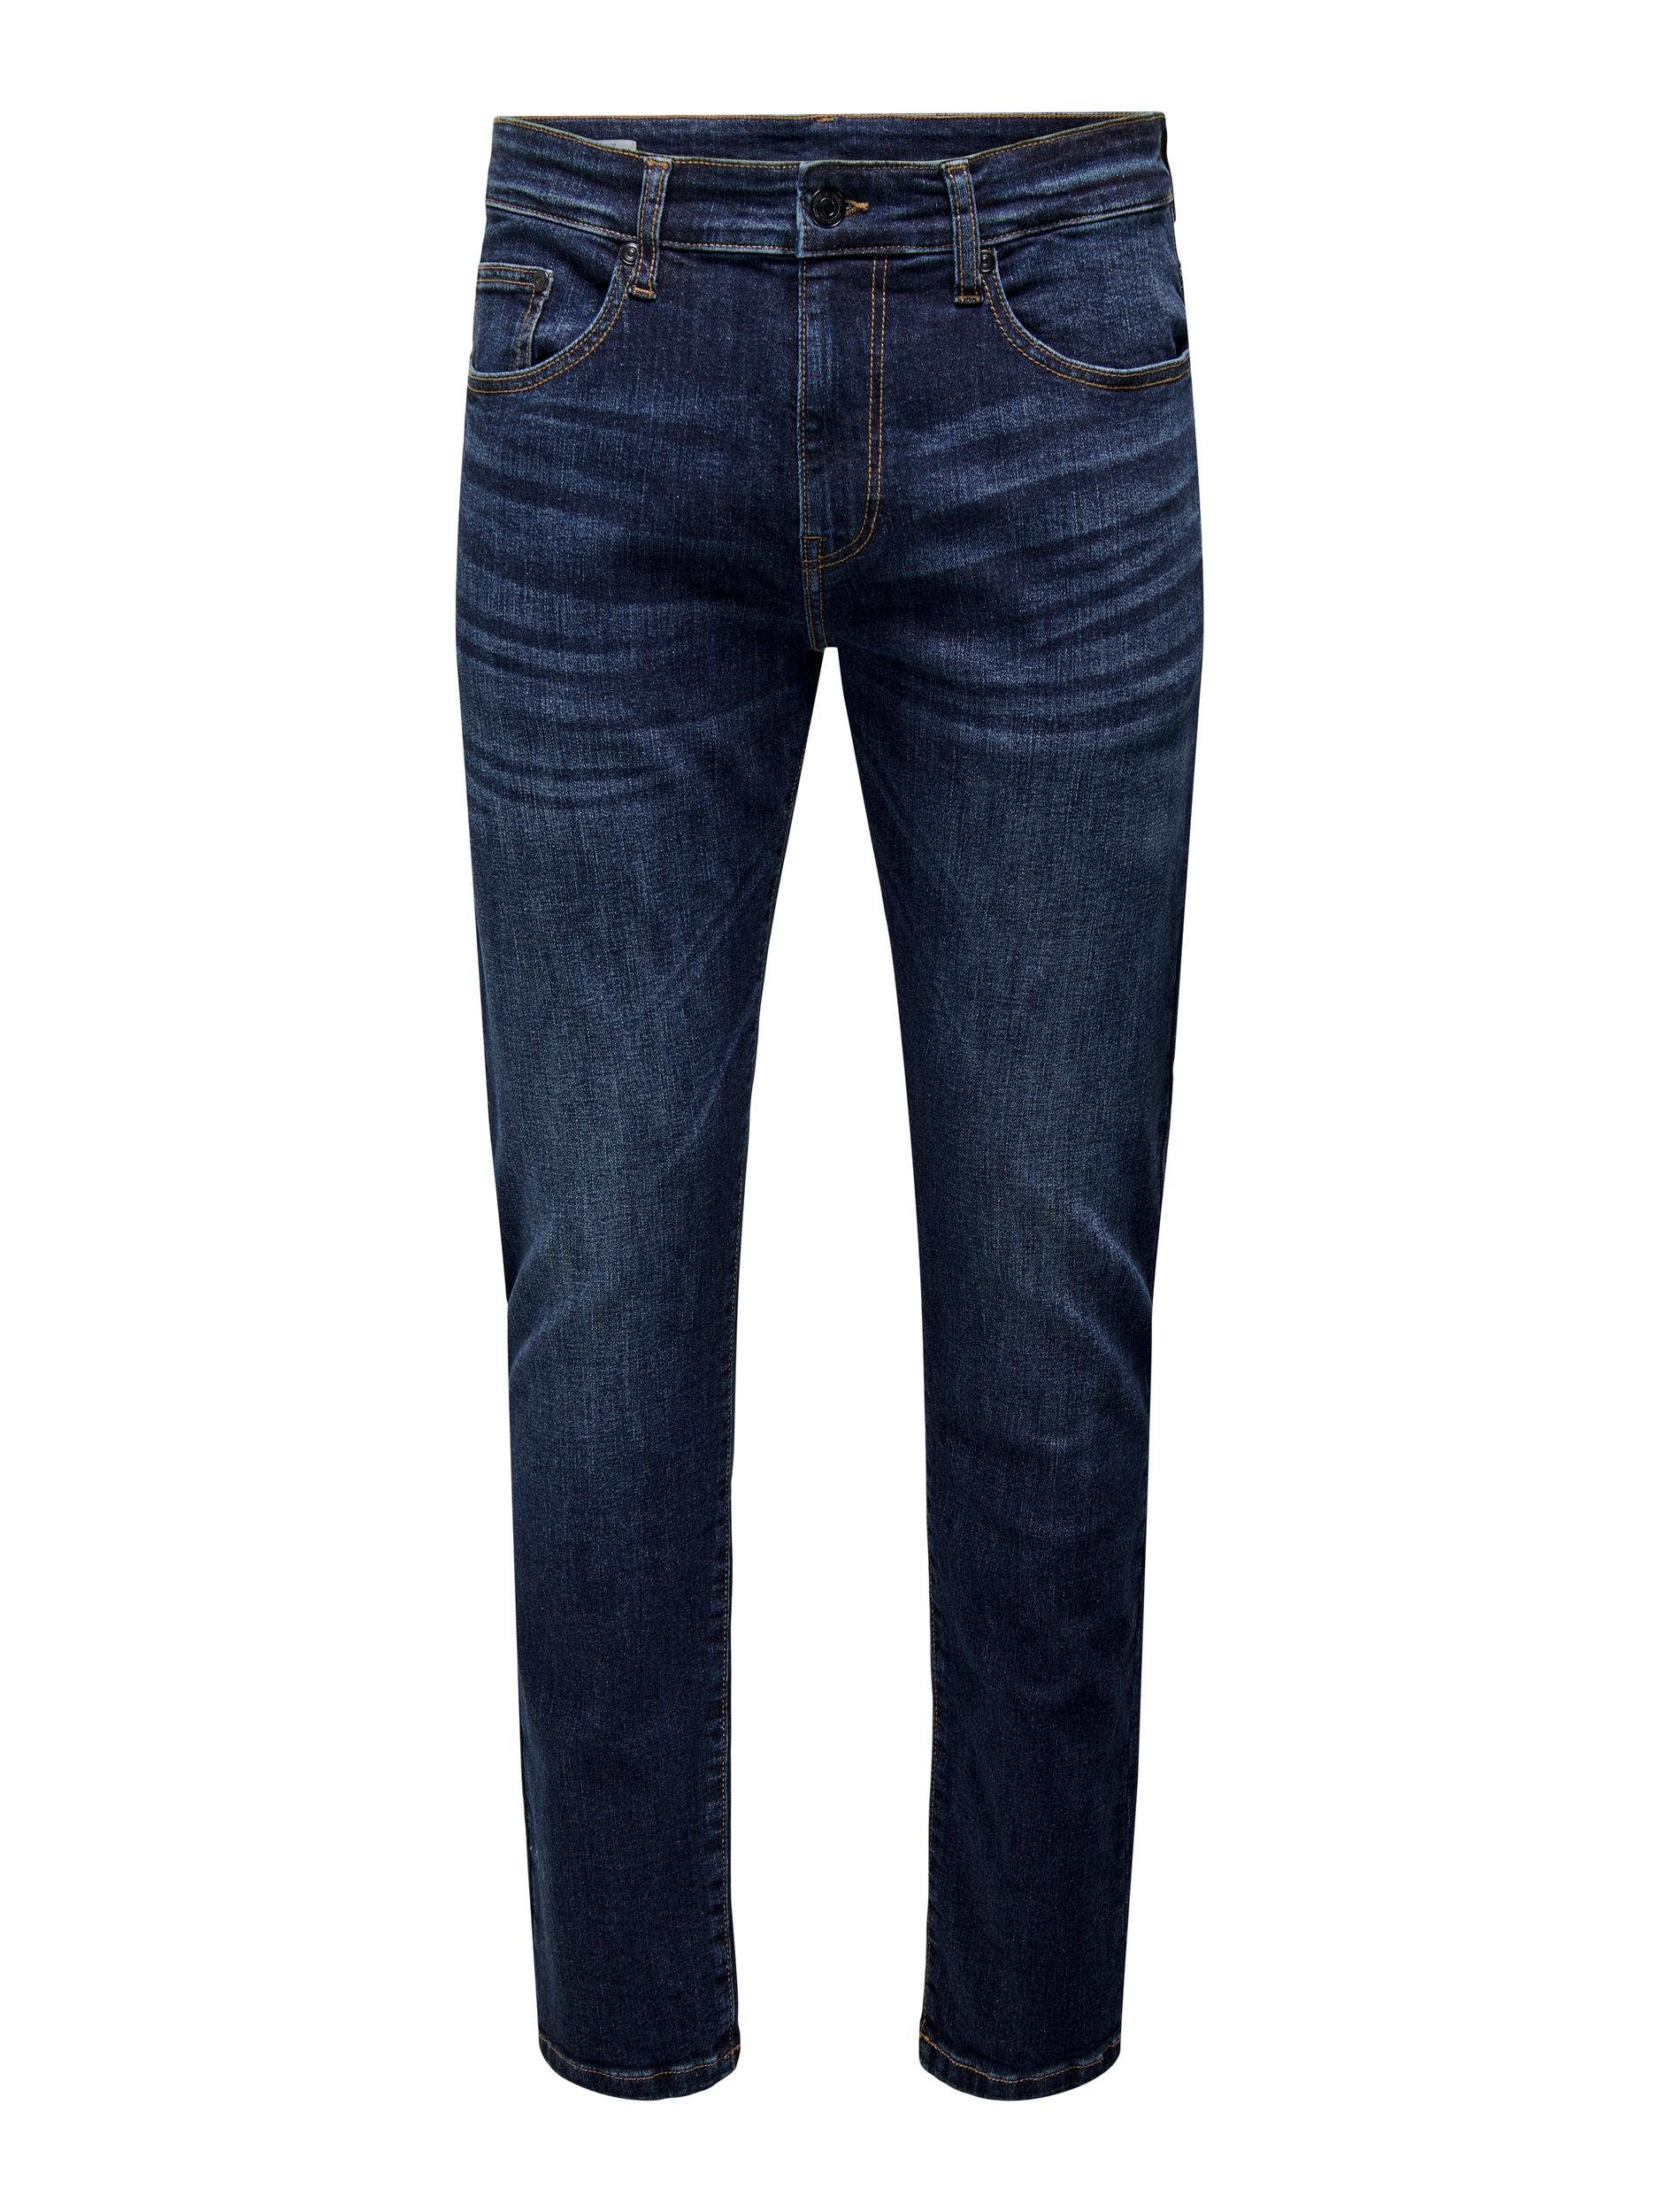 & REG.DK. ONLY NOOS 6752 JEANS Straight-Jeans SONS BLUE DNM ONSWEFT